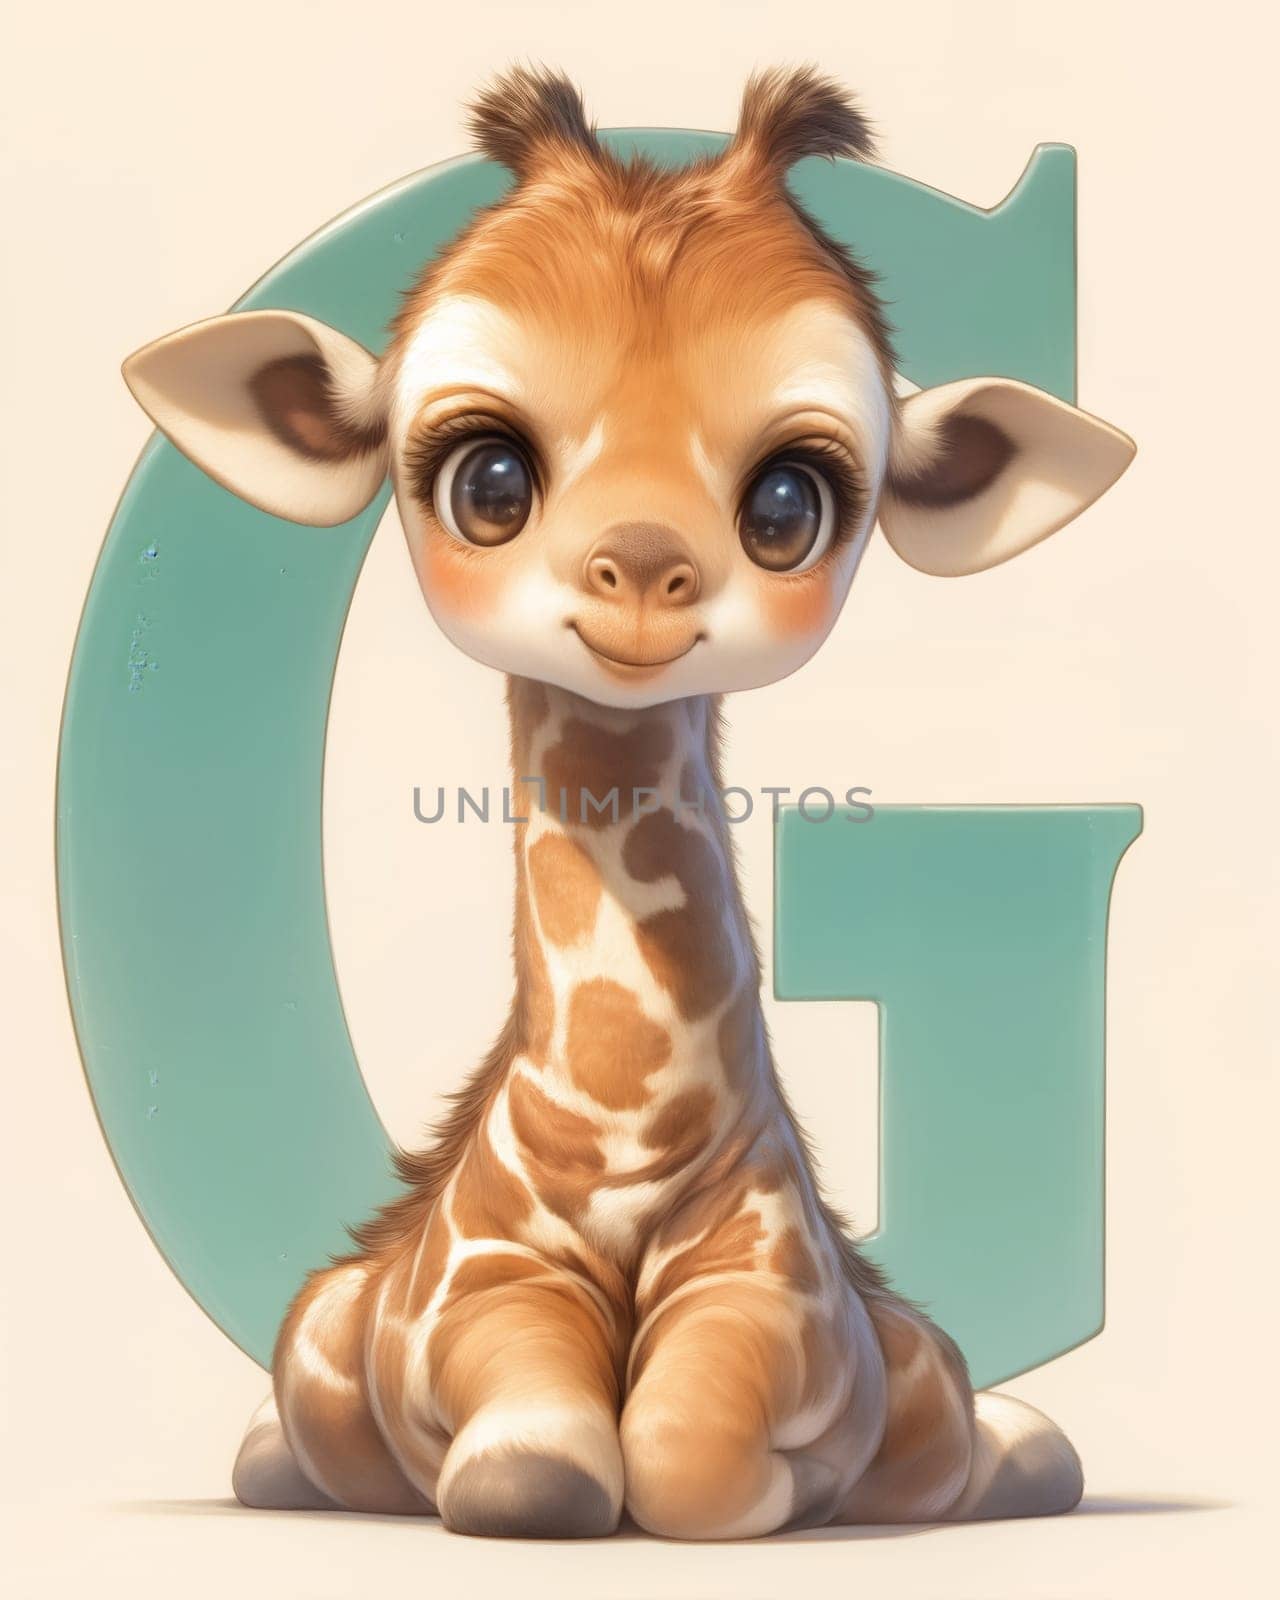 Illustration of a giraffe and the letter "U", learning the alphabet. Selective focus.